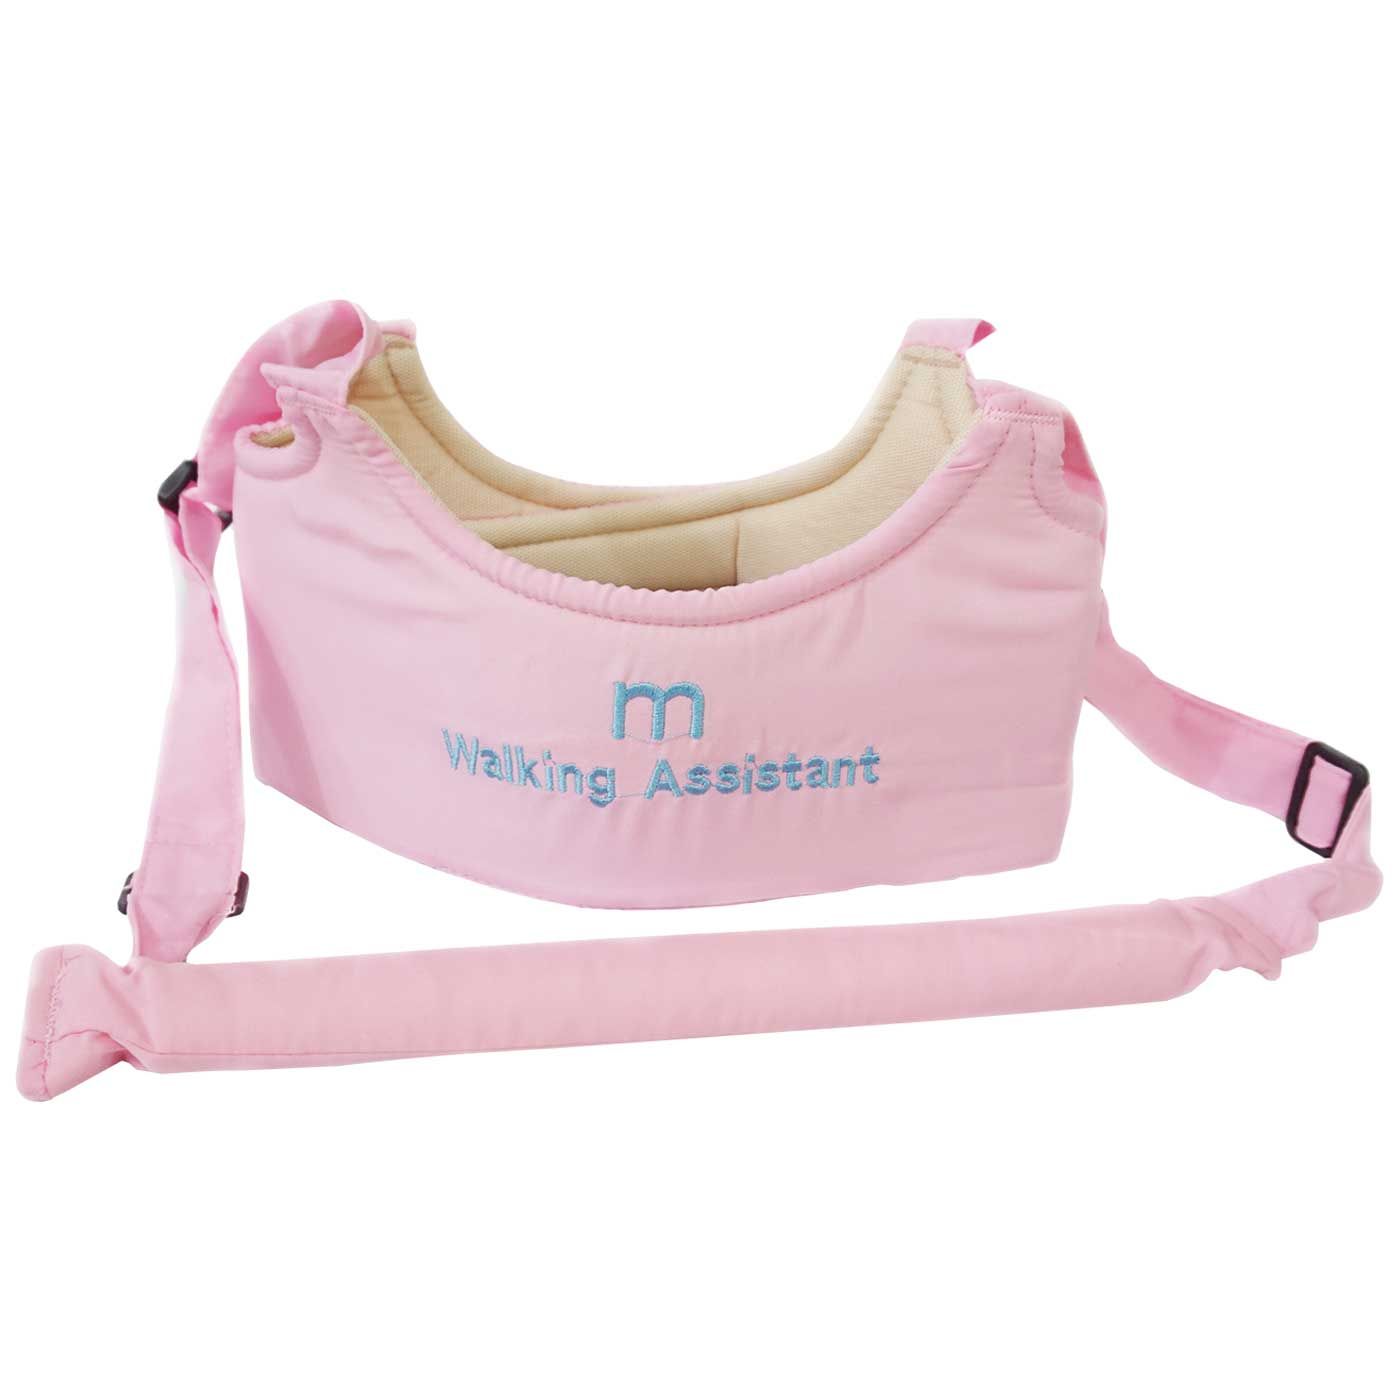 Babiesfirst Walking Assistant Pink - 2